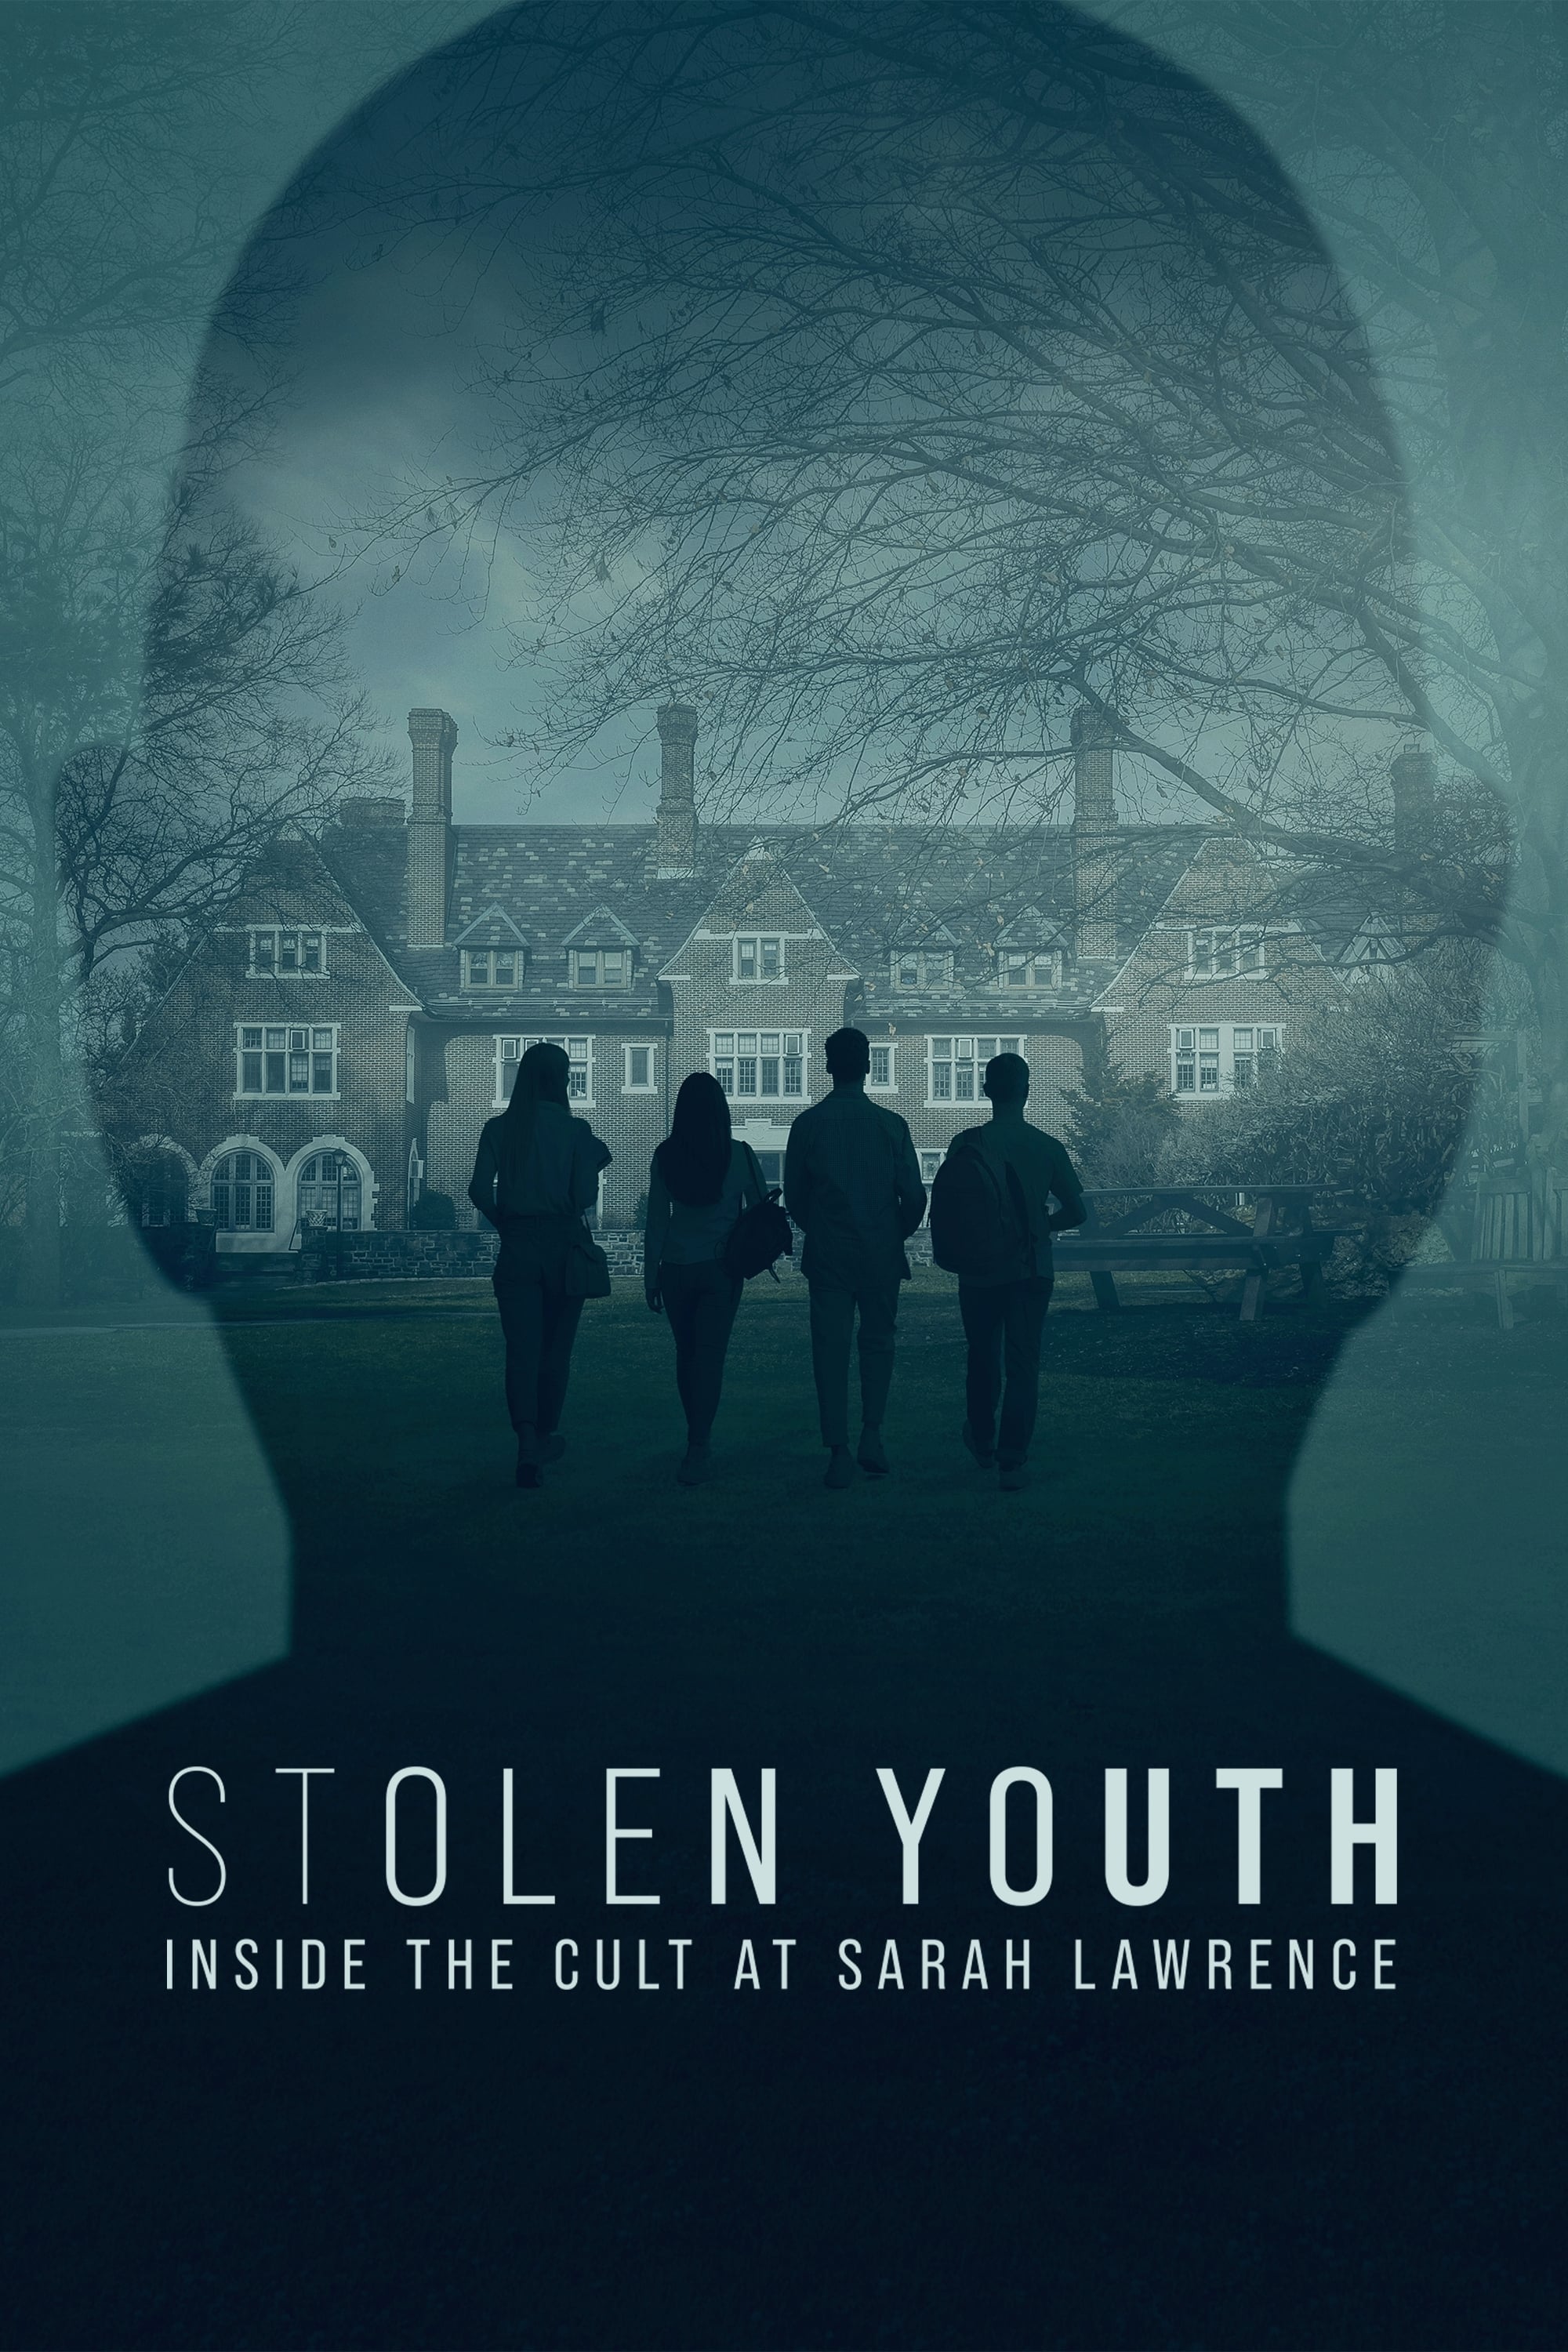 Stolen Youth: Inside the Cult at Sarah Lawrence TV Shows About Crime